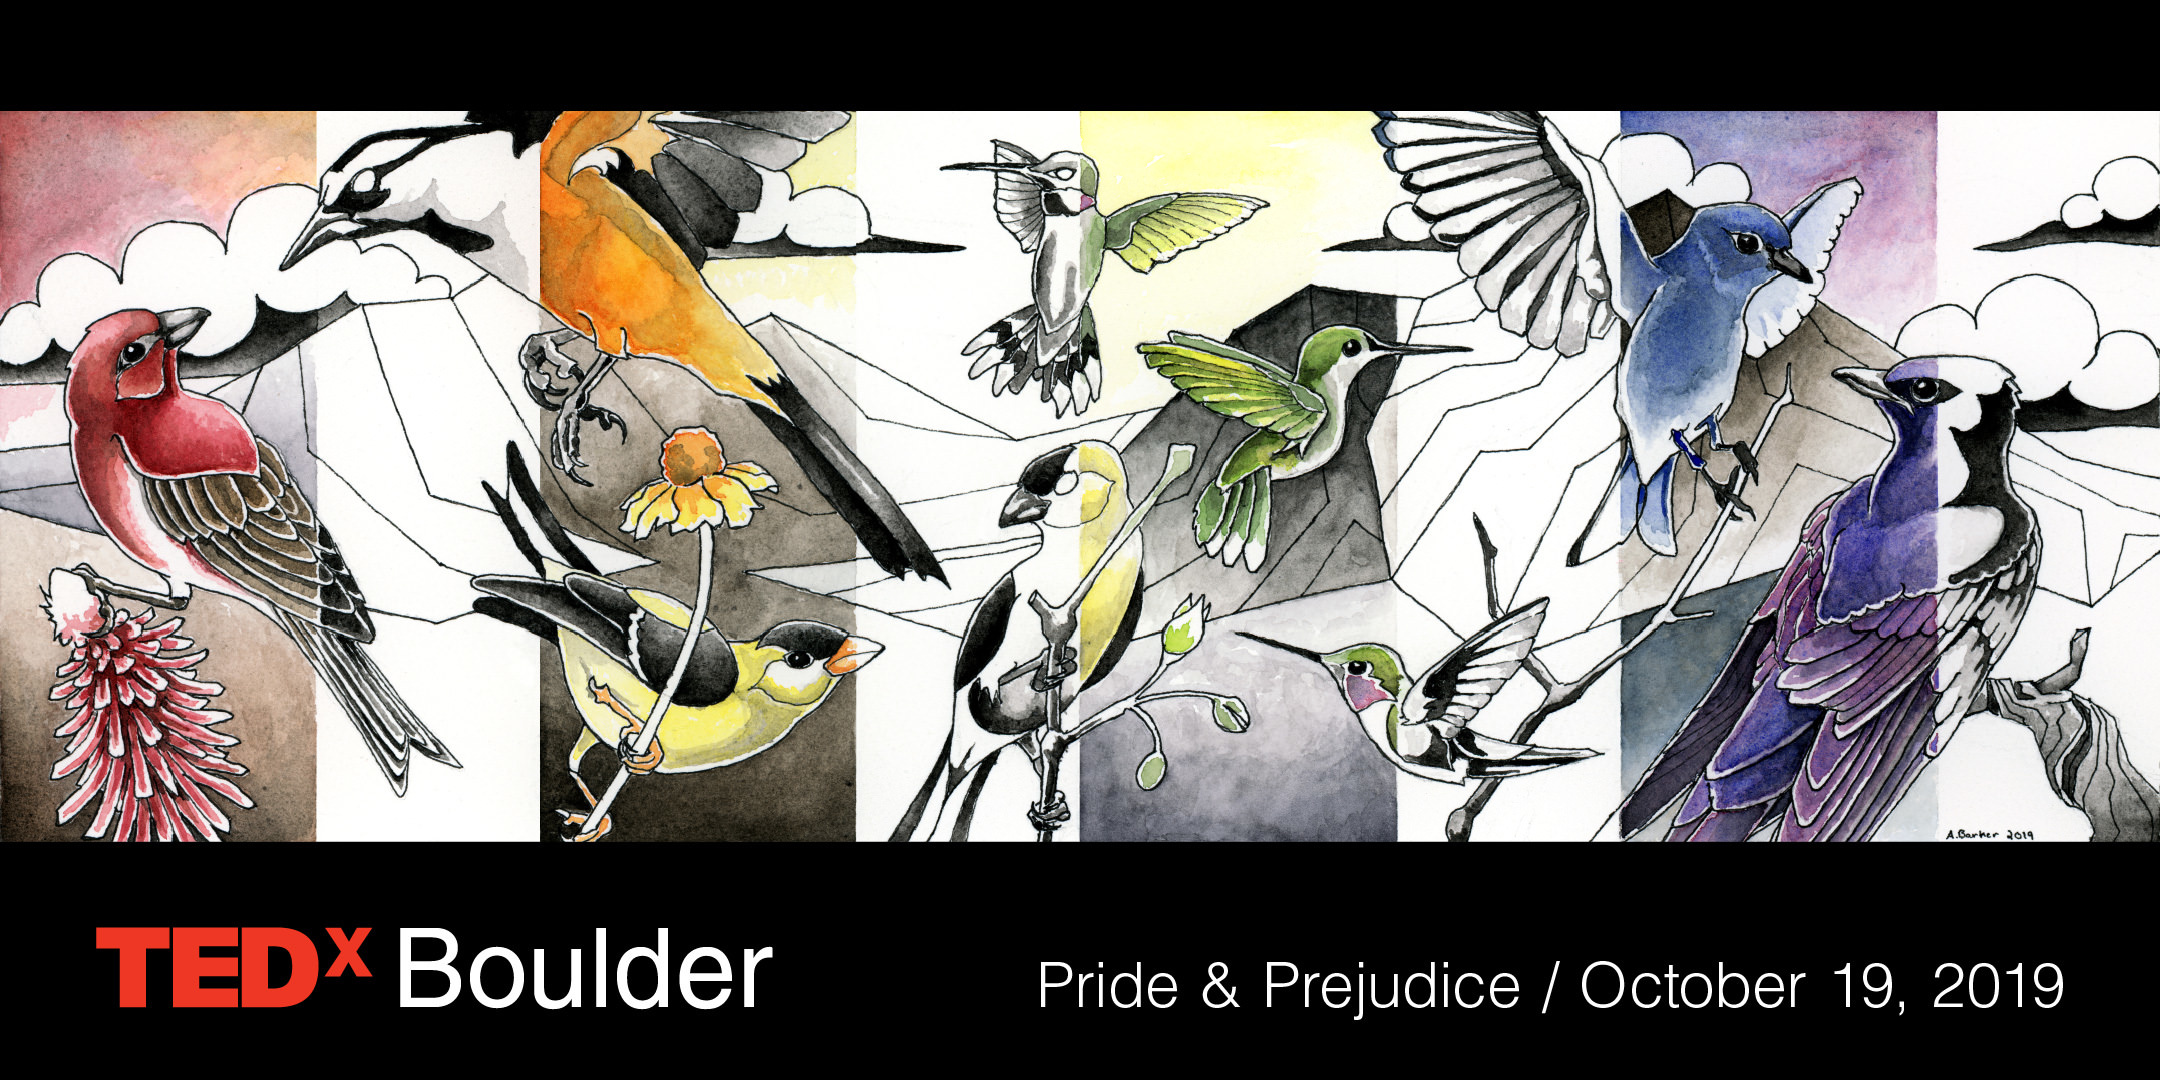 What To Expect for TEDxBoulder Pride & Prejudice